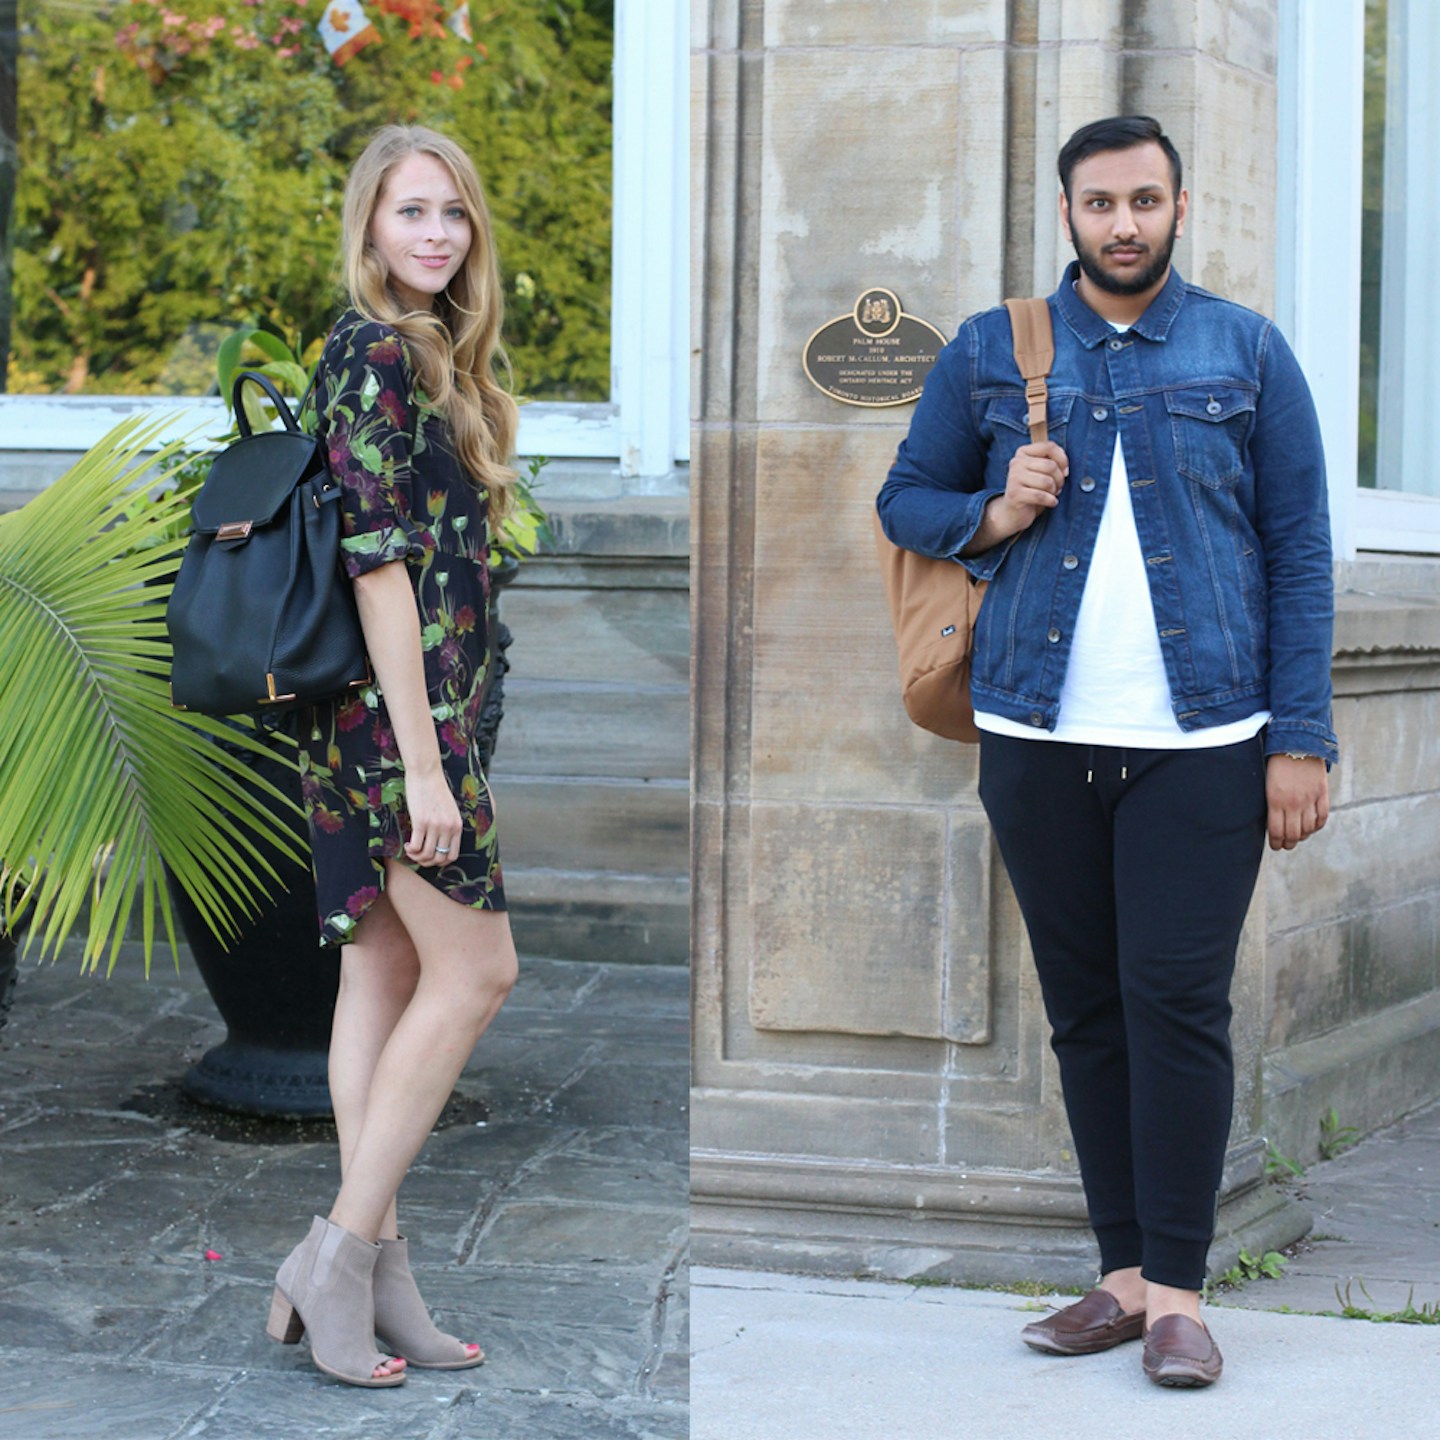 Backpack twins: The Prep Guy x Nataliastyle